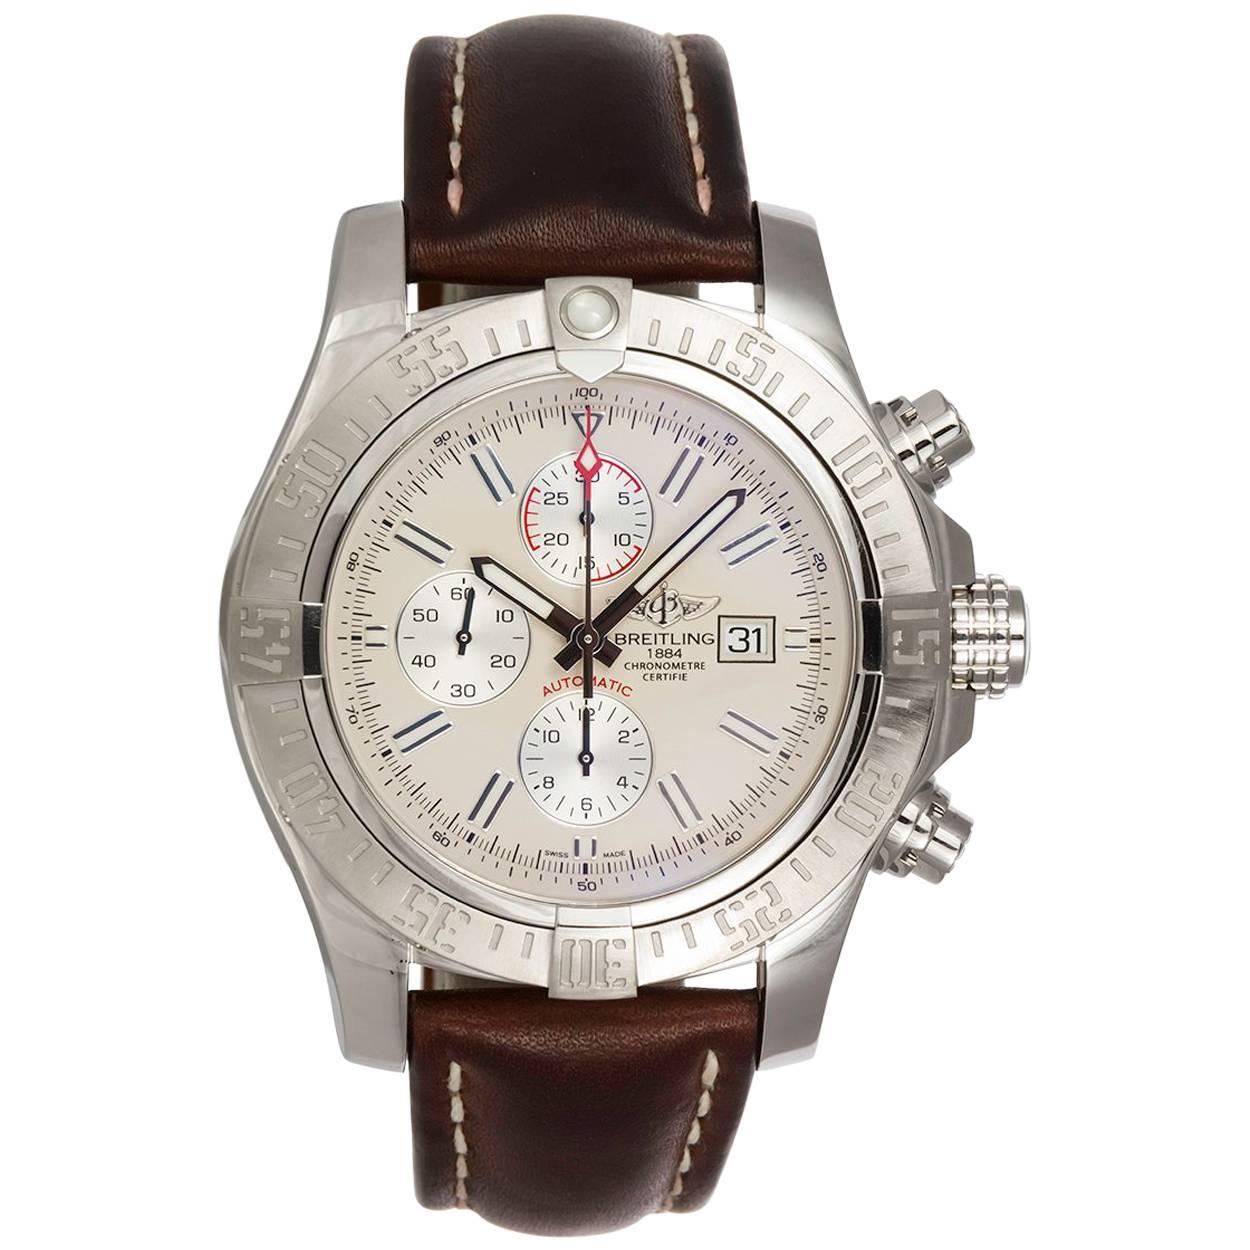 Breitling Men’s Super Avenger II Automatic Chronograph Watch A13371